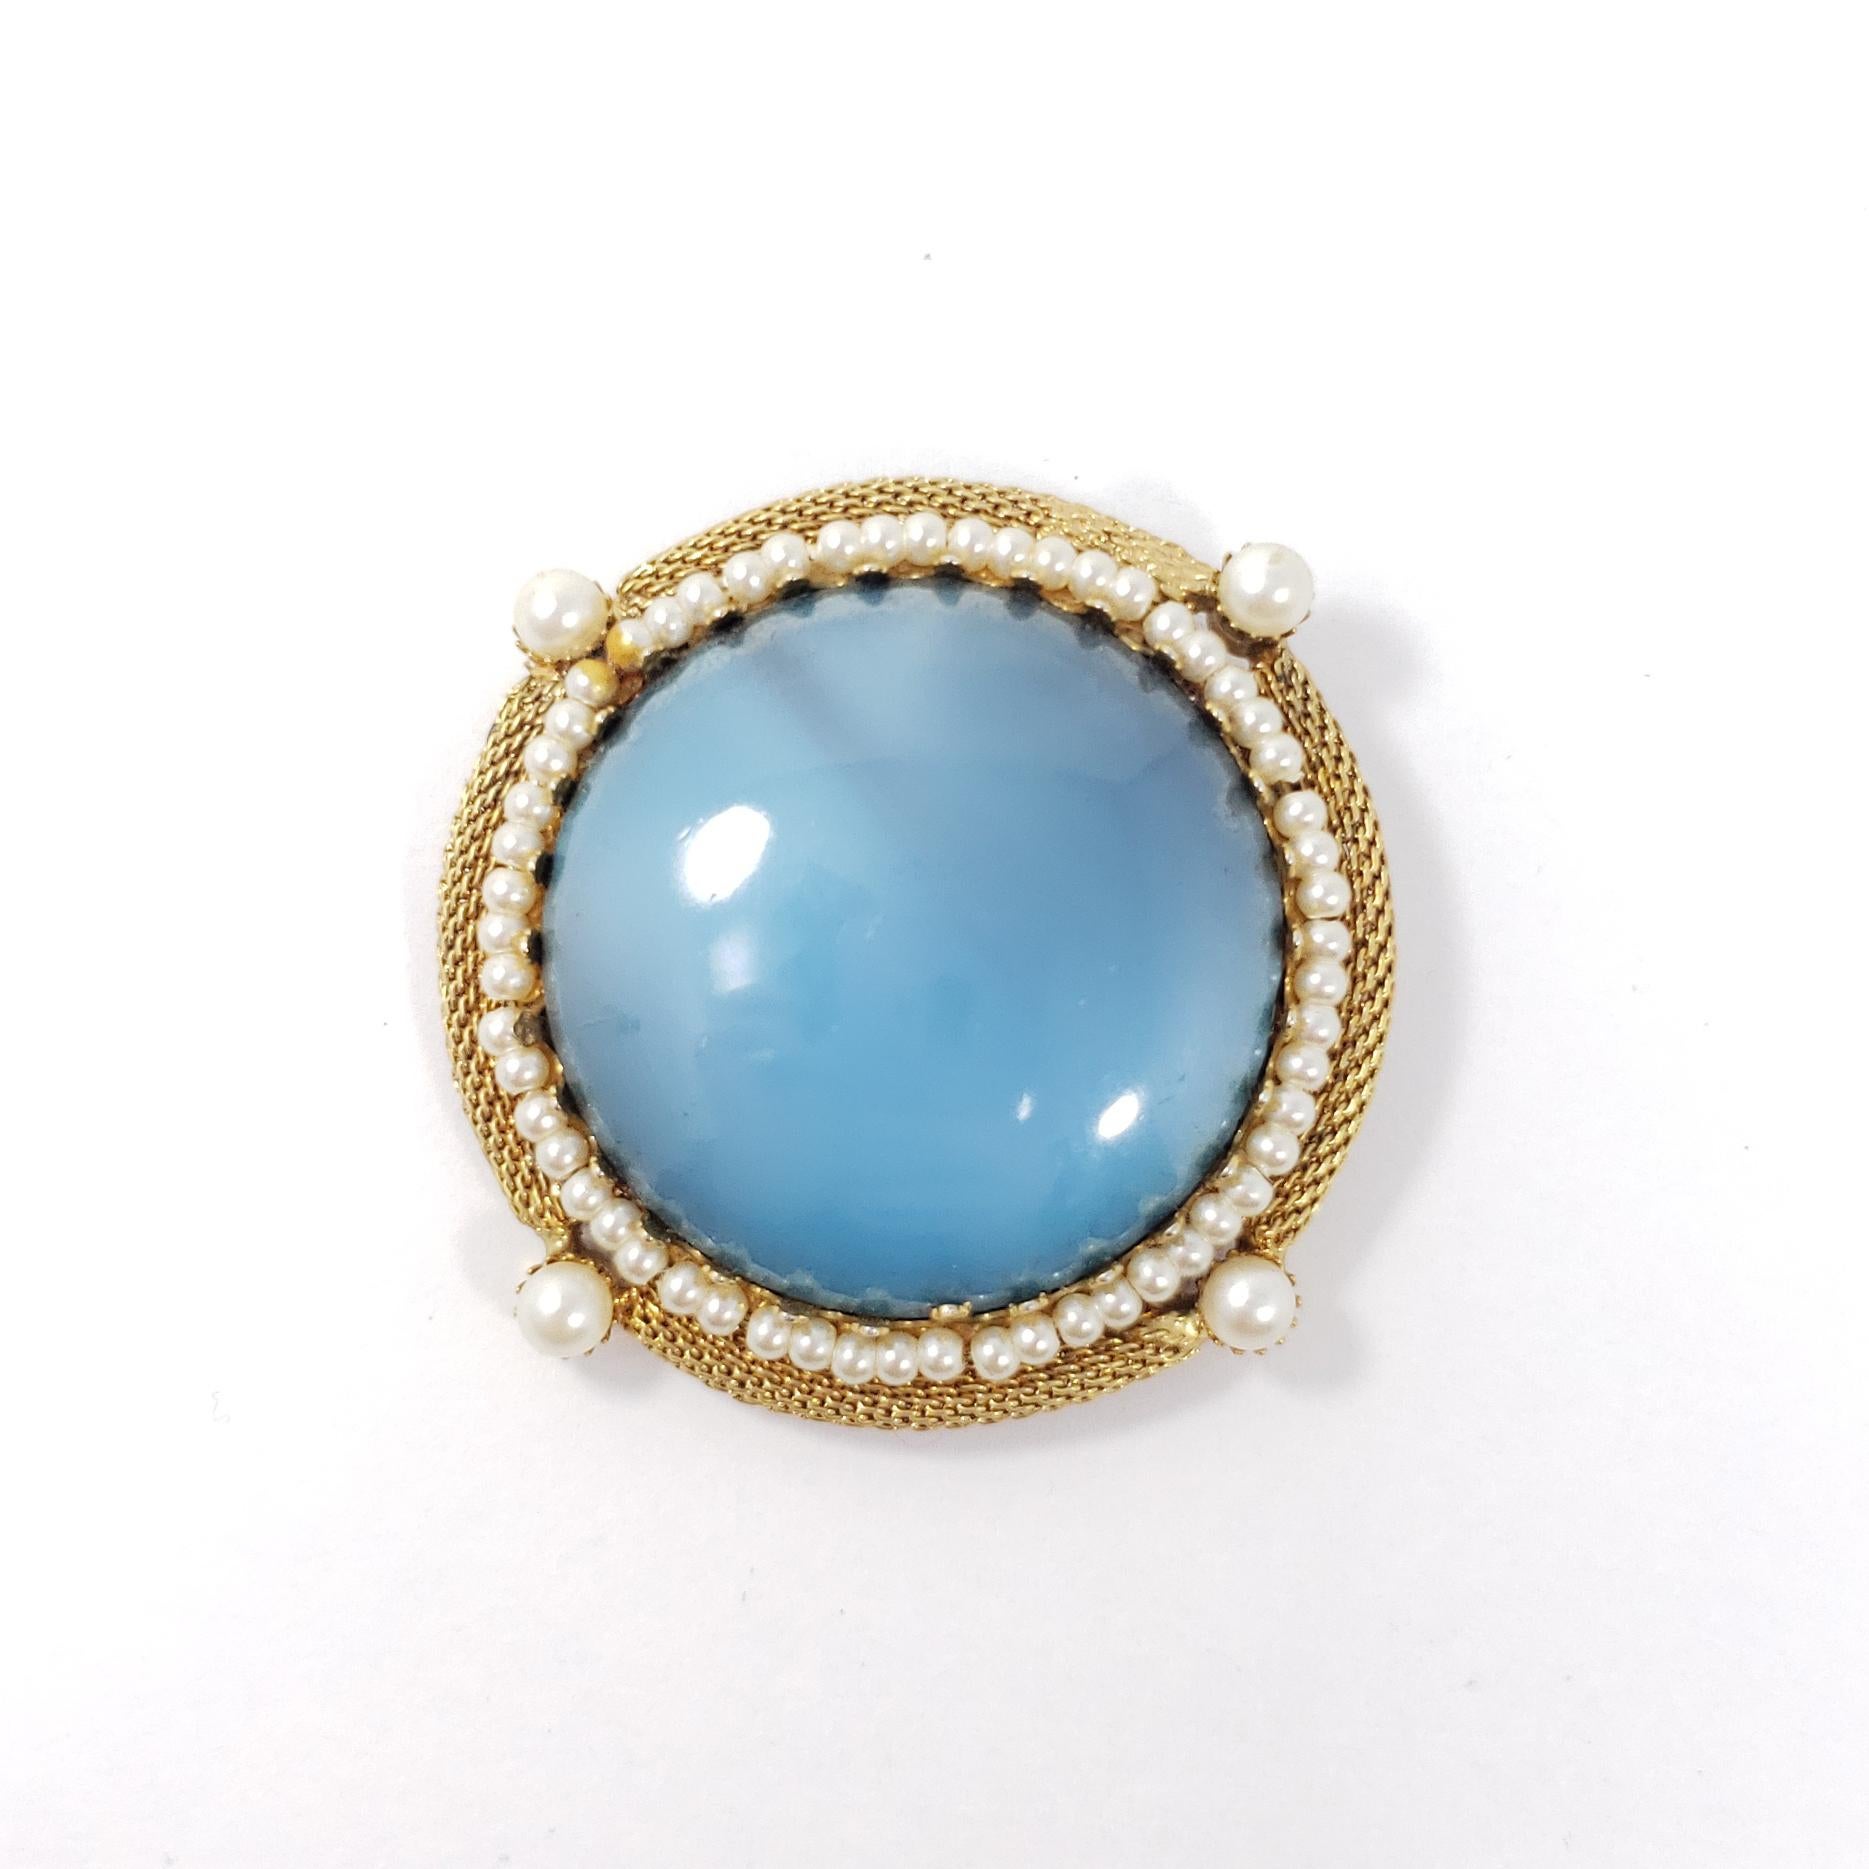 A sophisticated vintage set, featuring gold-tone mesh bezels, accented with faux pearls and centerpiece faux larimar cabochons. Includes a single pin brooch and a pair of clip-on earrings.

Gold-tone. Vintage, 20th century.

Brooch dimensions: 2